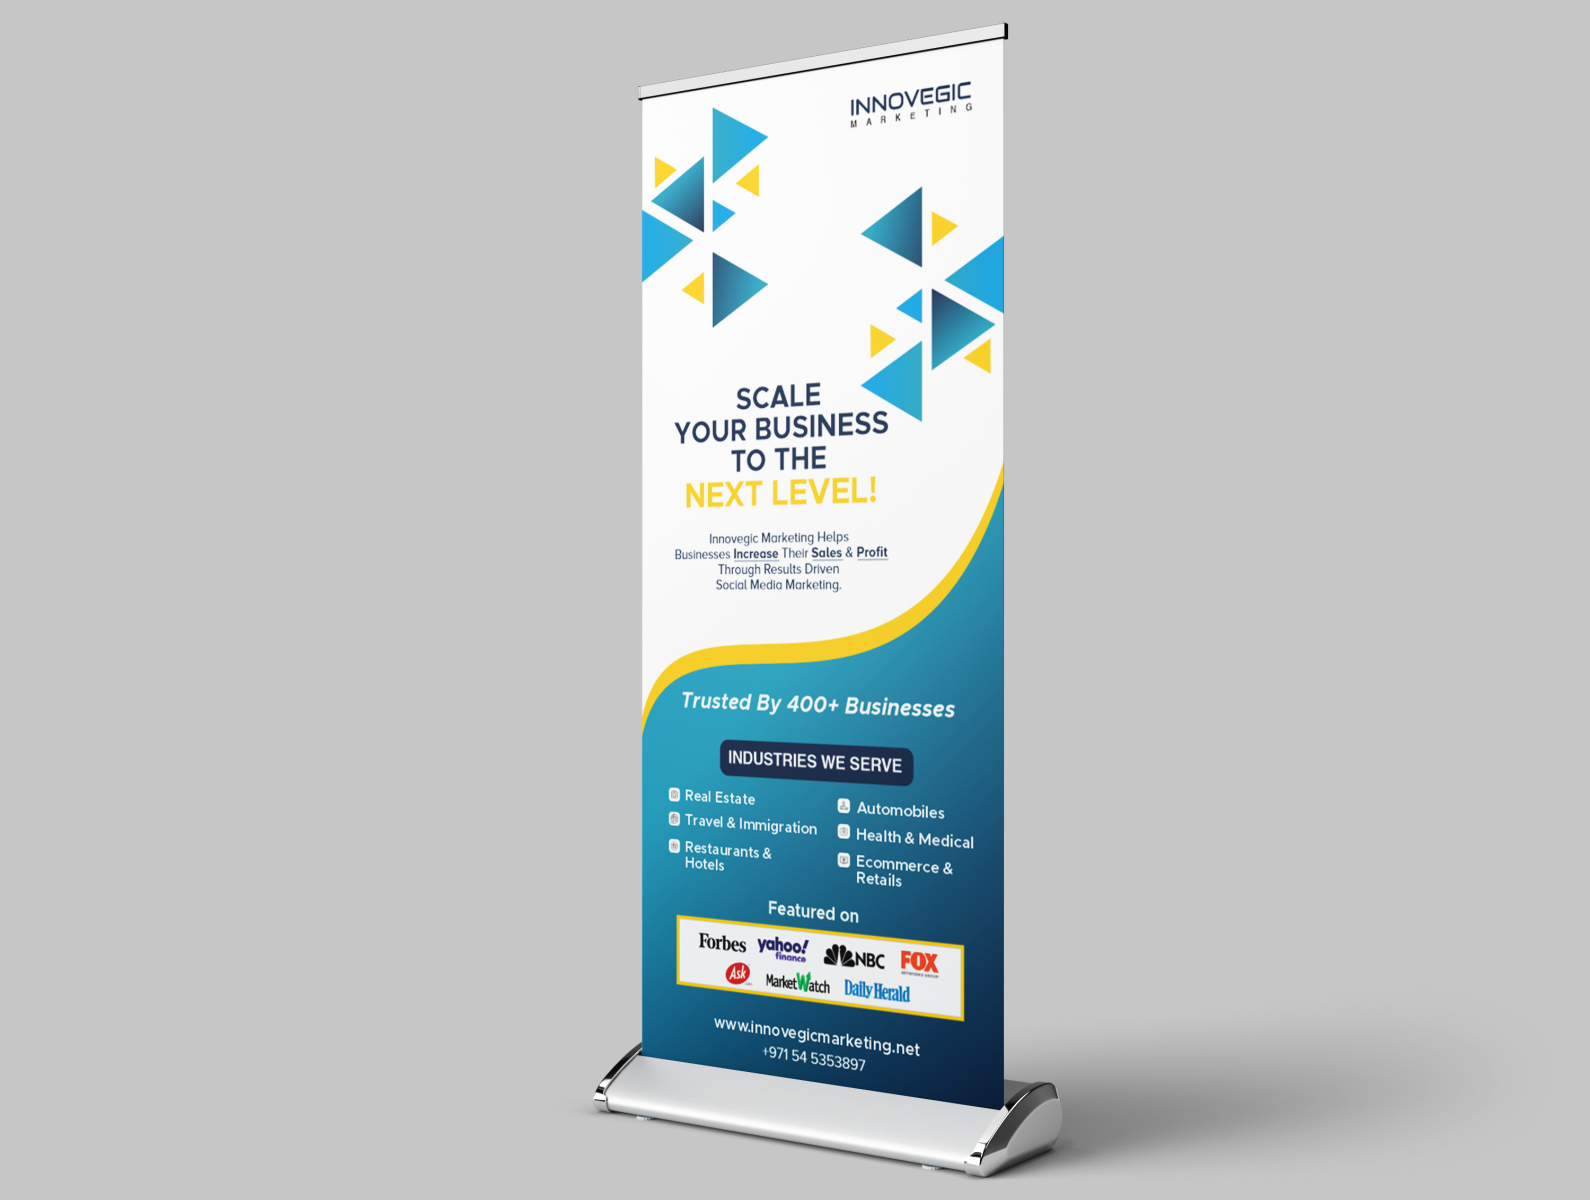 Business Rollup Banner by Dammike Jayaweera on Dribbble